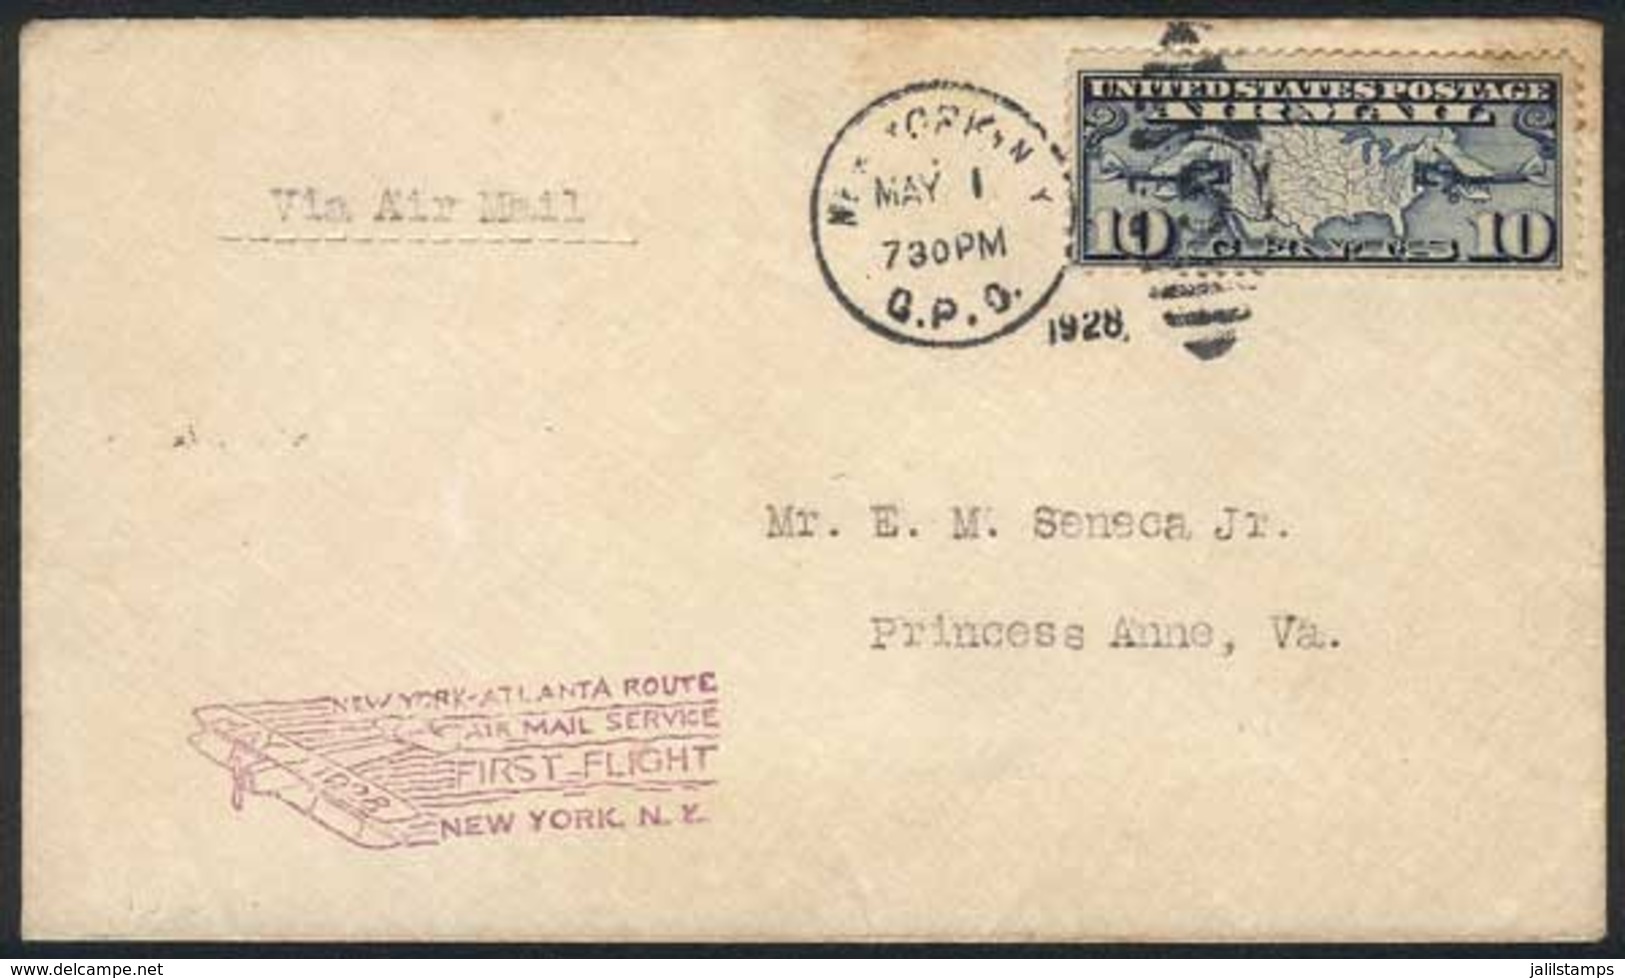 UNITED STATES: 1/MAY/1928 New York-Atlanta Route First Flight Cover, With Washington DC Arrival Backstamp, VF Quality! - Postal History